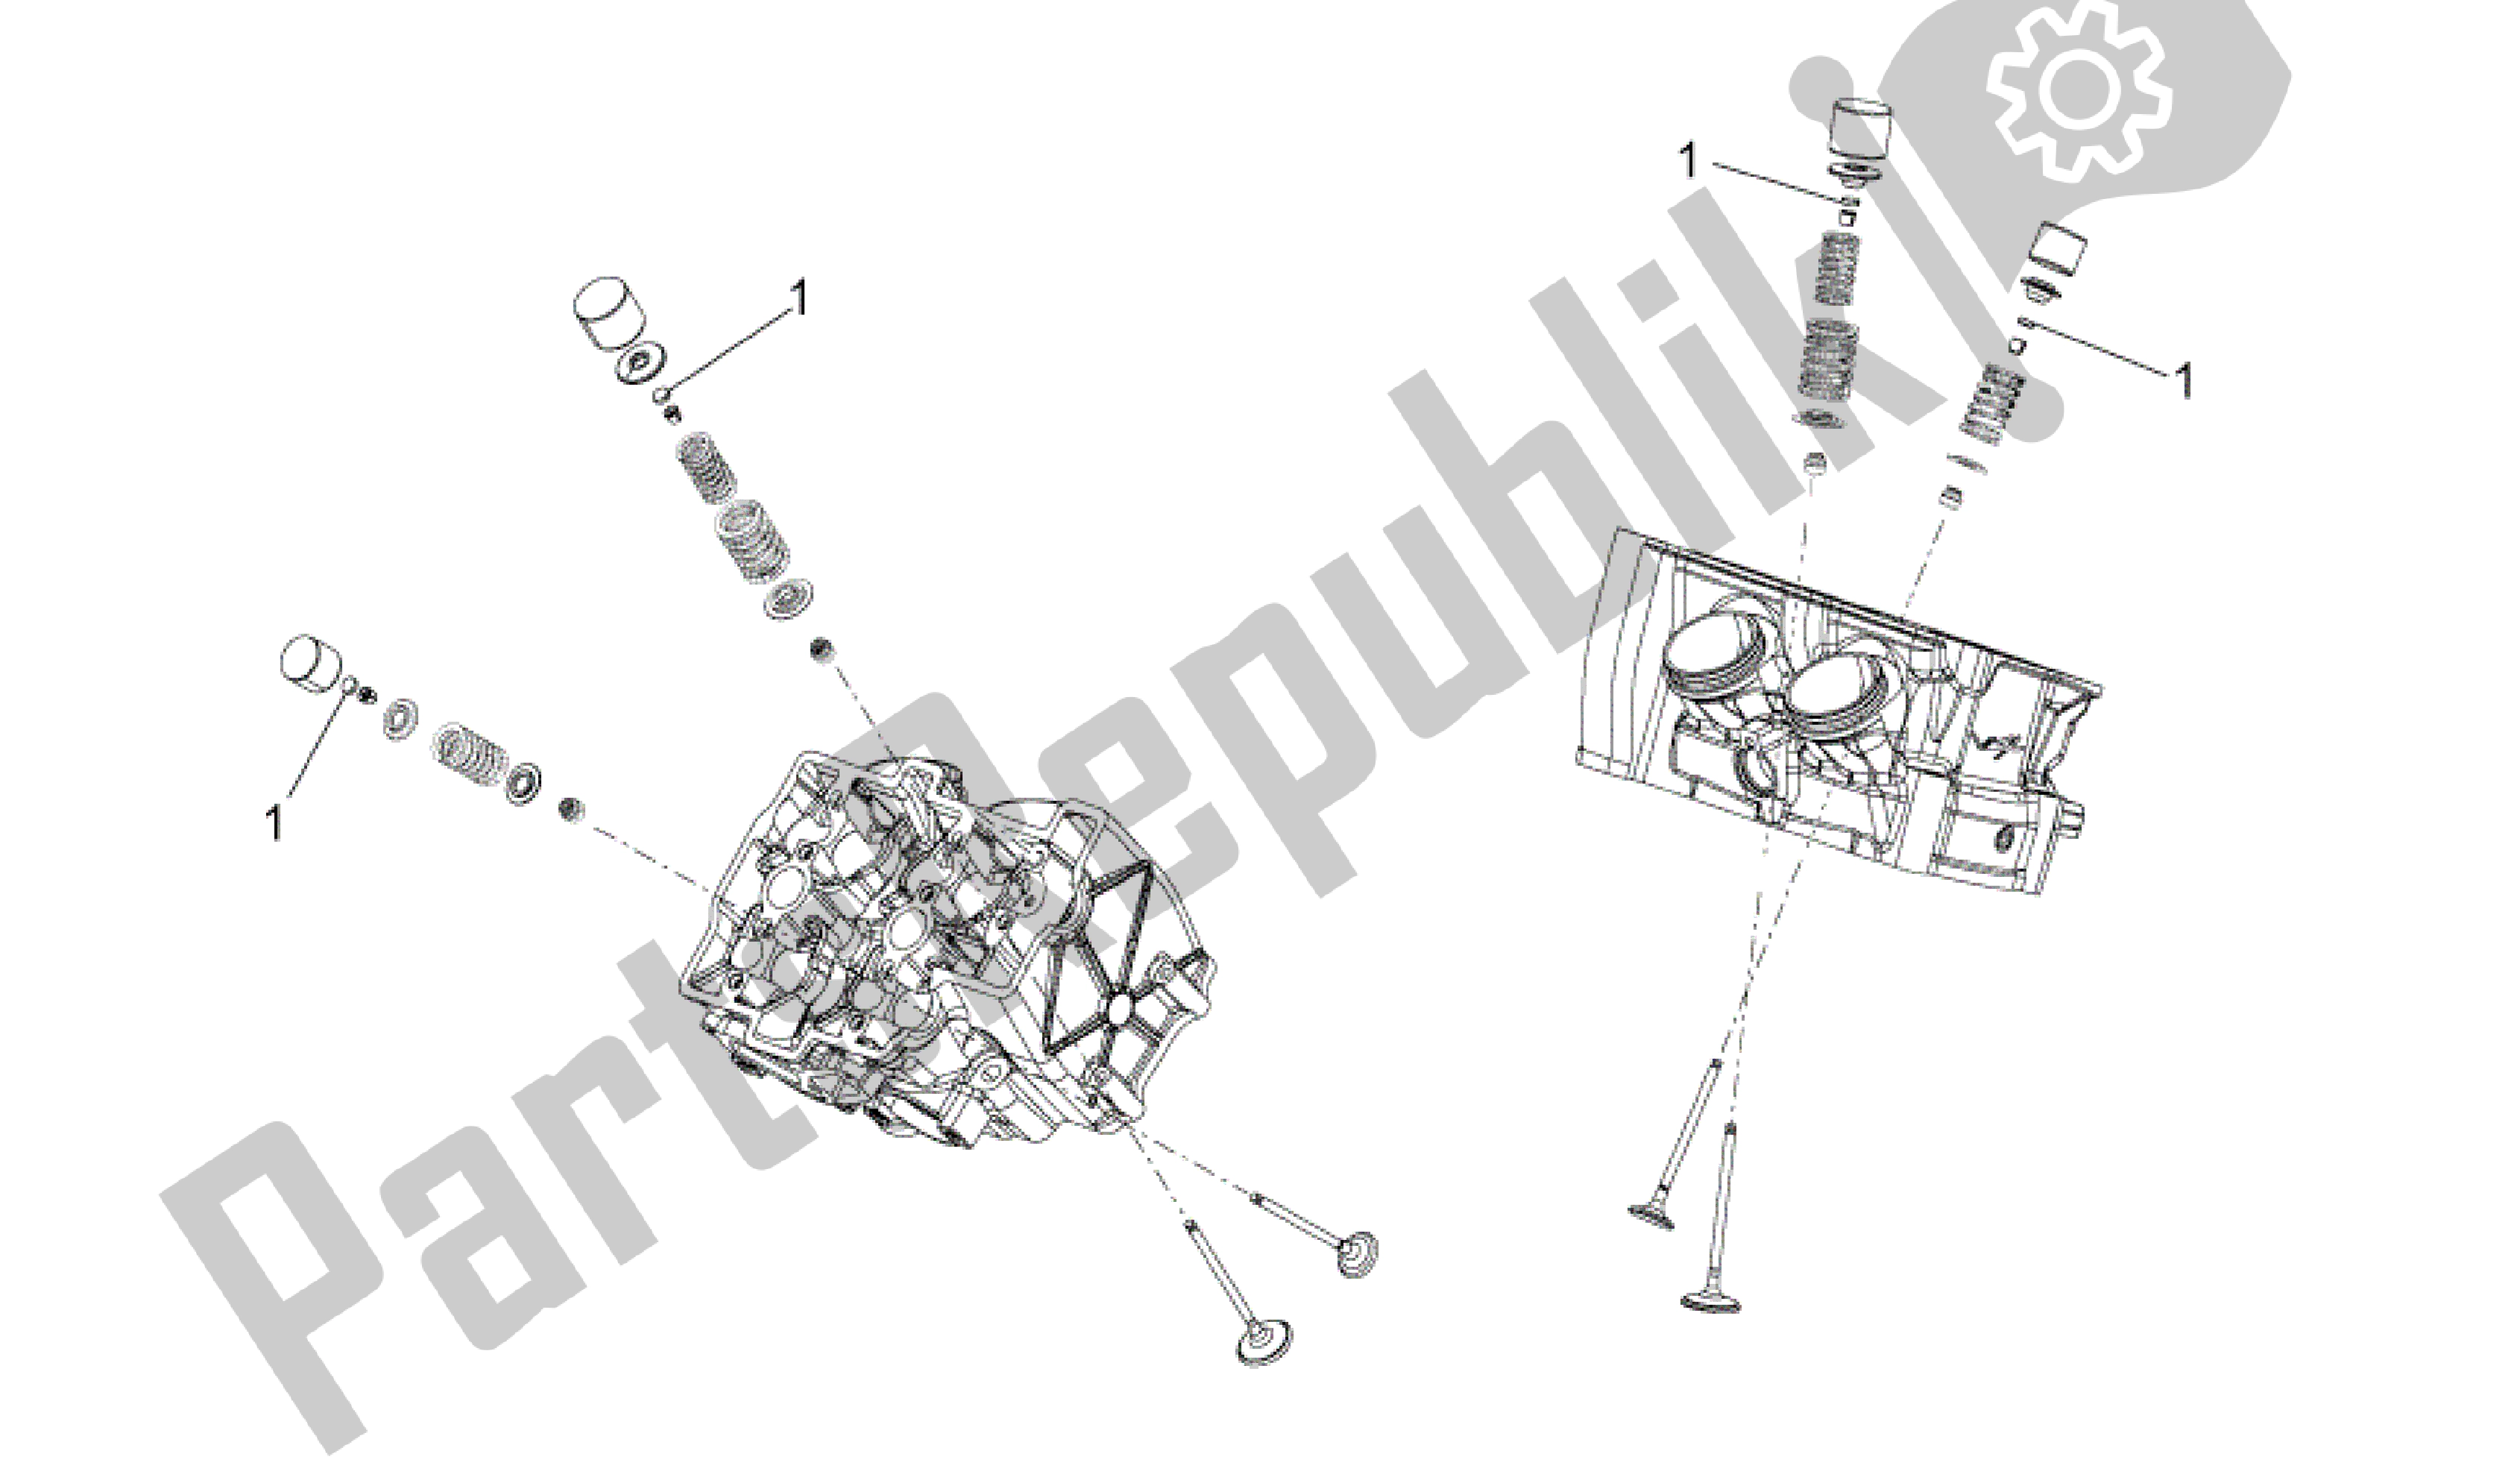 All parts for the Valves Pads of the Aprilia RSV4 Aprc R 3982 1000 2011 - 2012